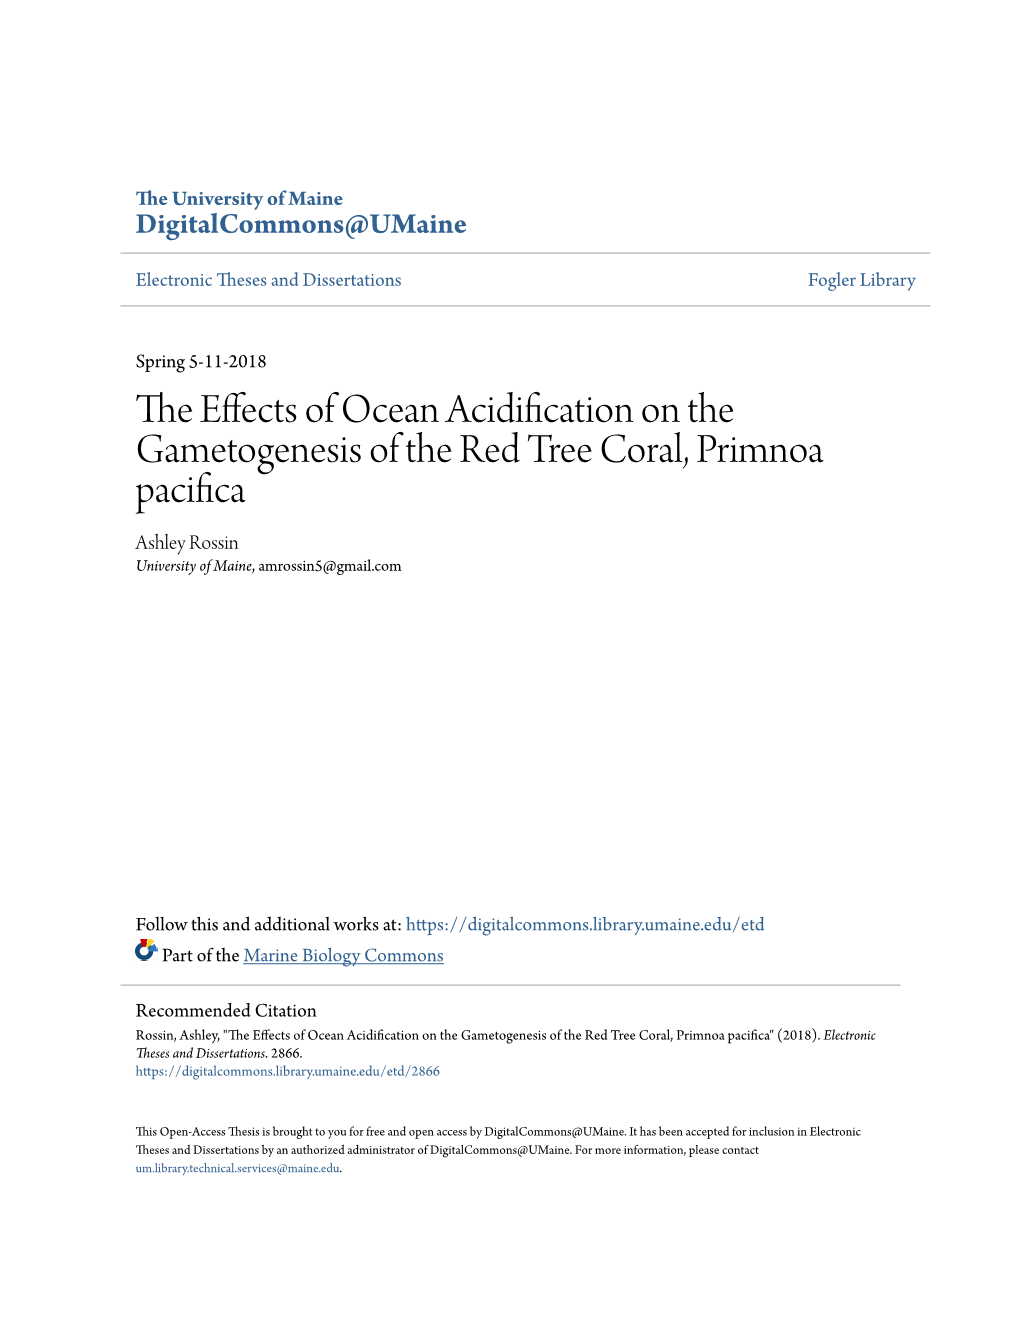 The Effects of Ocean Acidification on the Gametogenesis of the Red Tree Coral, Primnoa Pacifica" (2018)